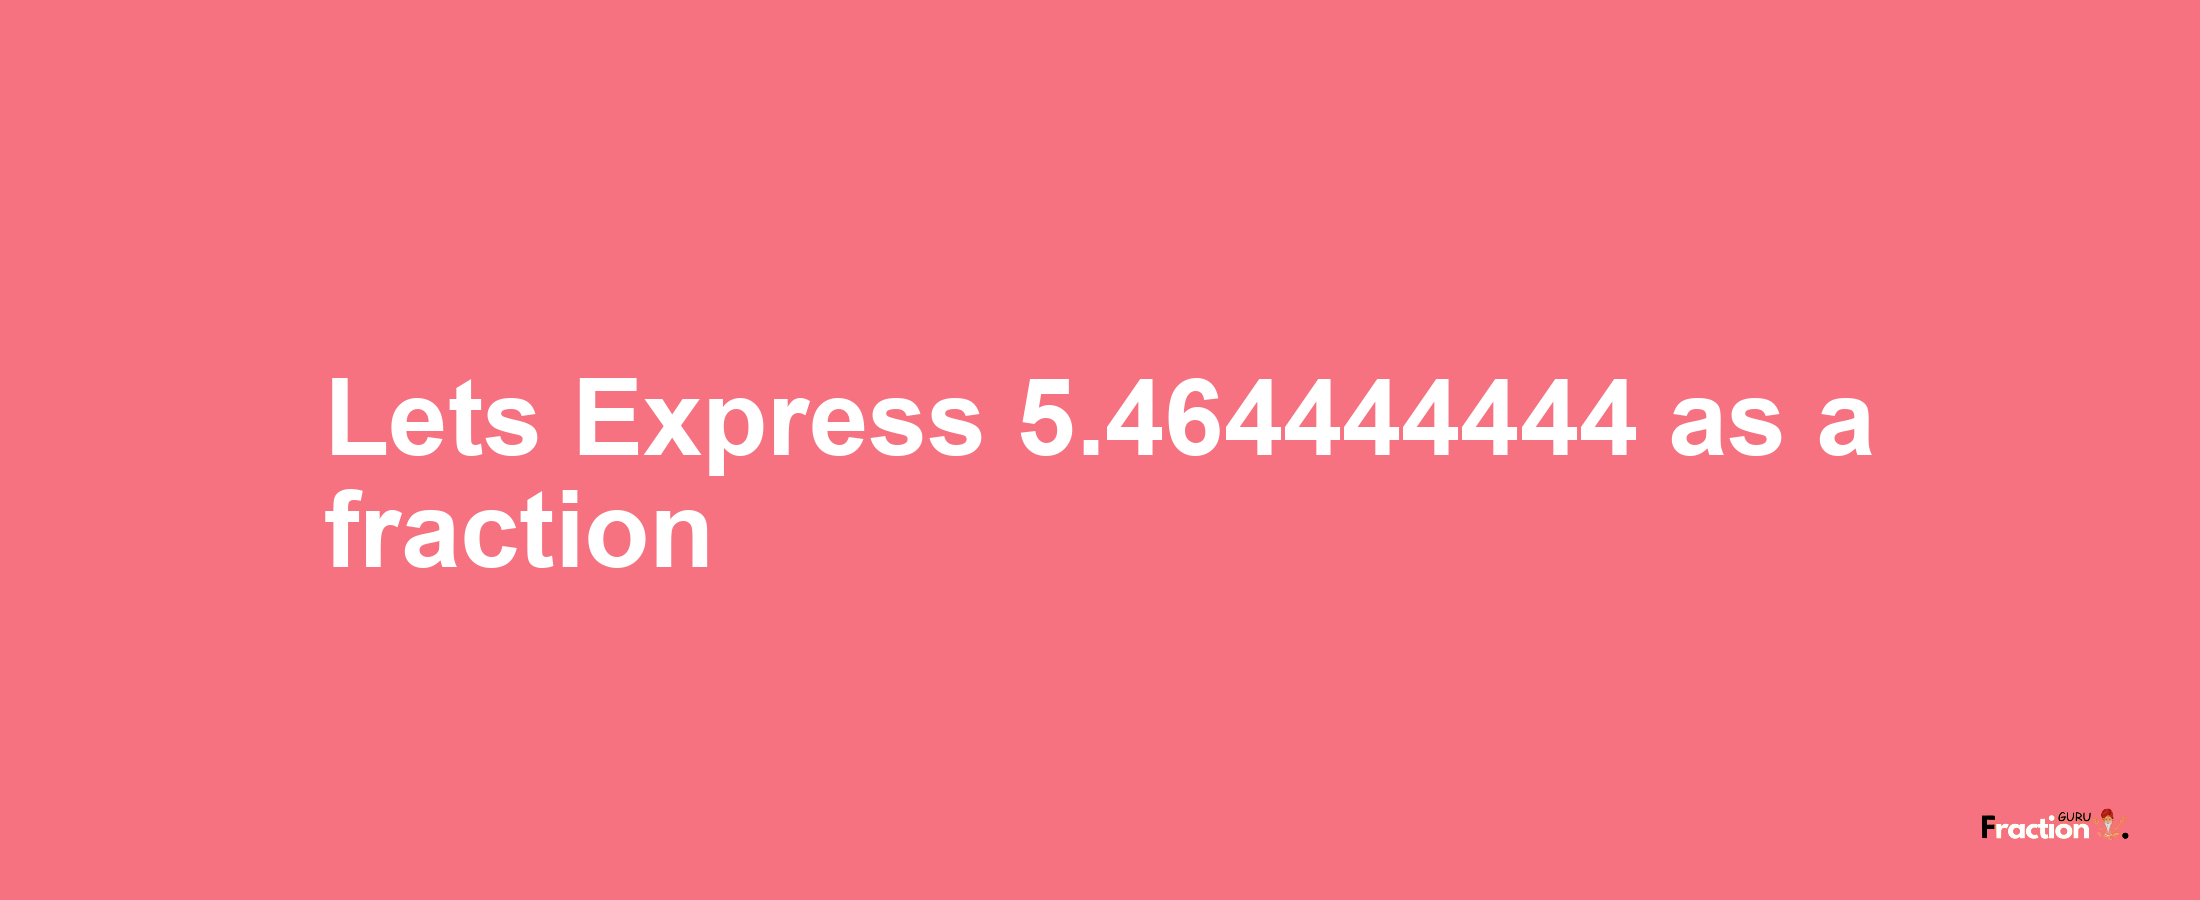 Lets Express 5.464444444 as afraction